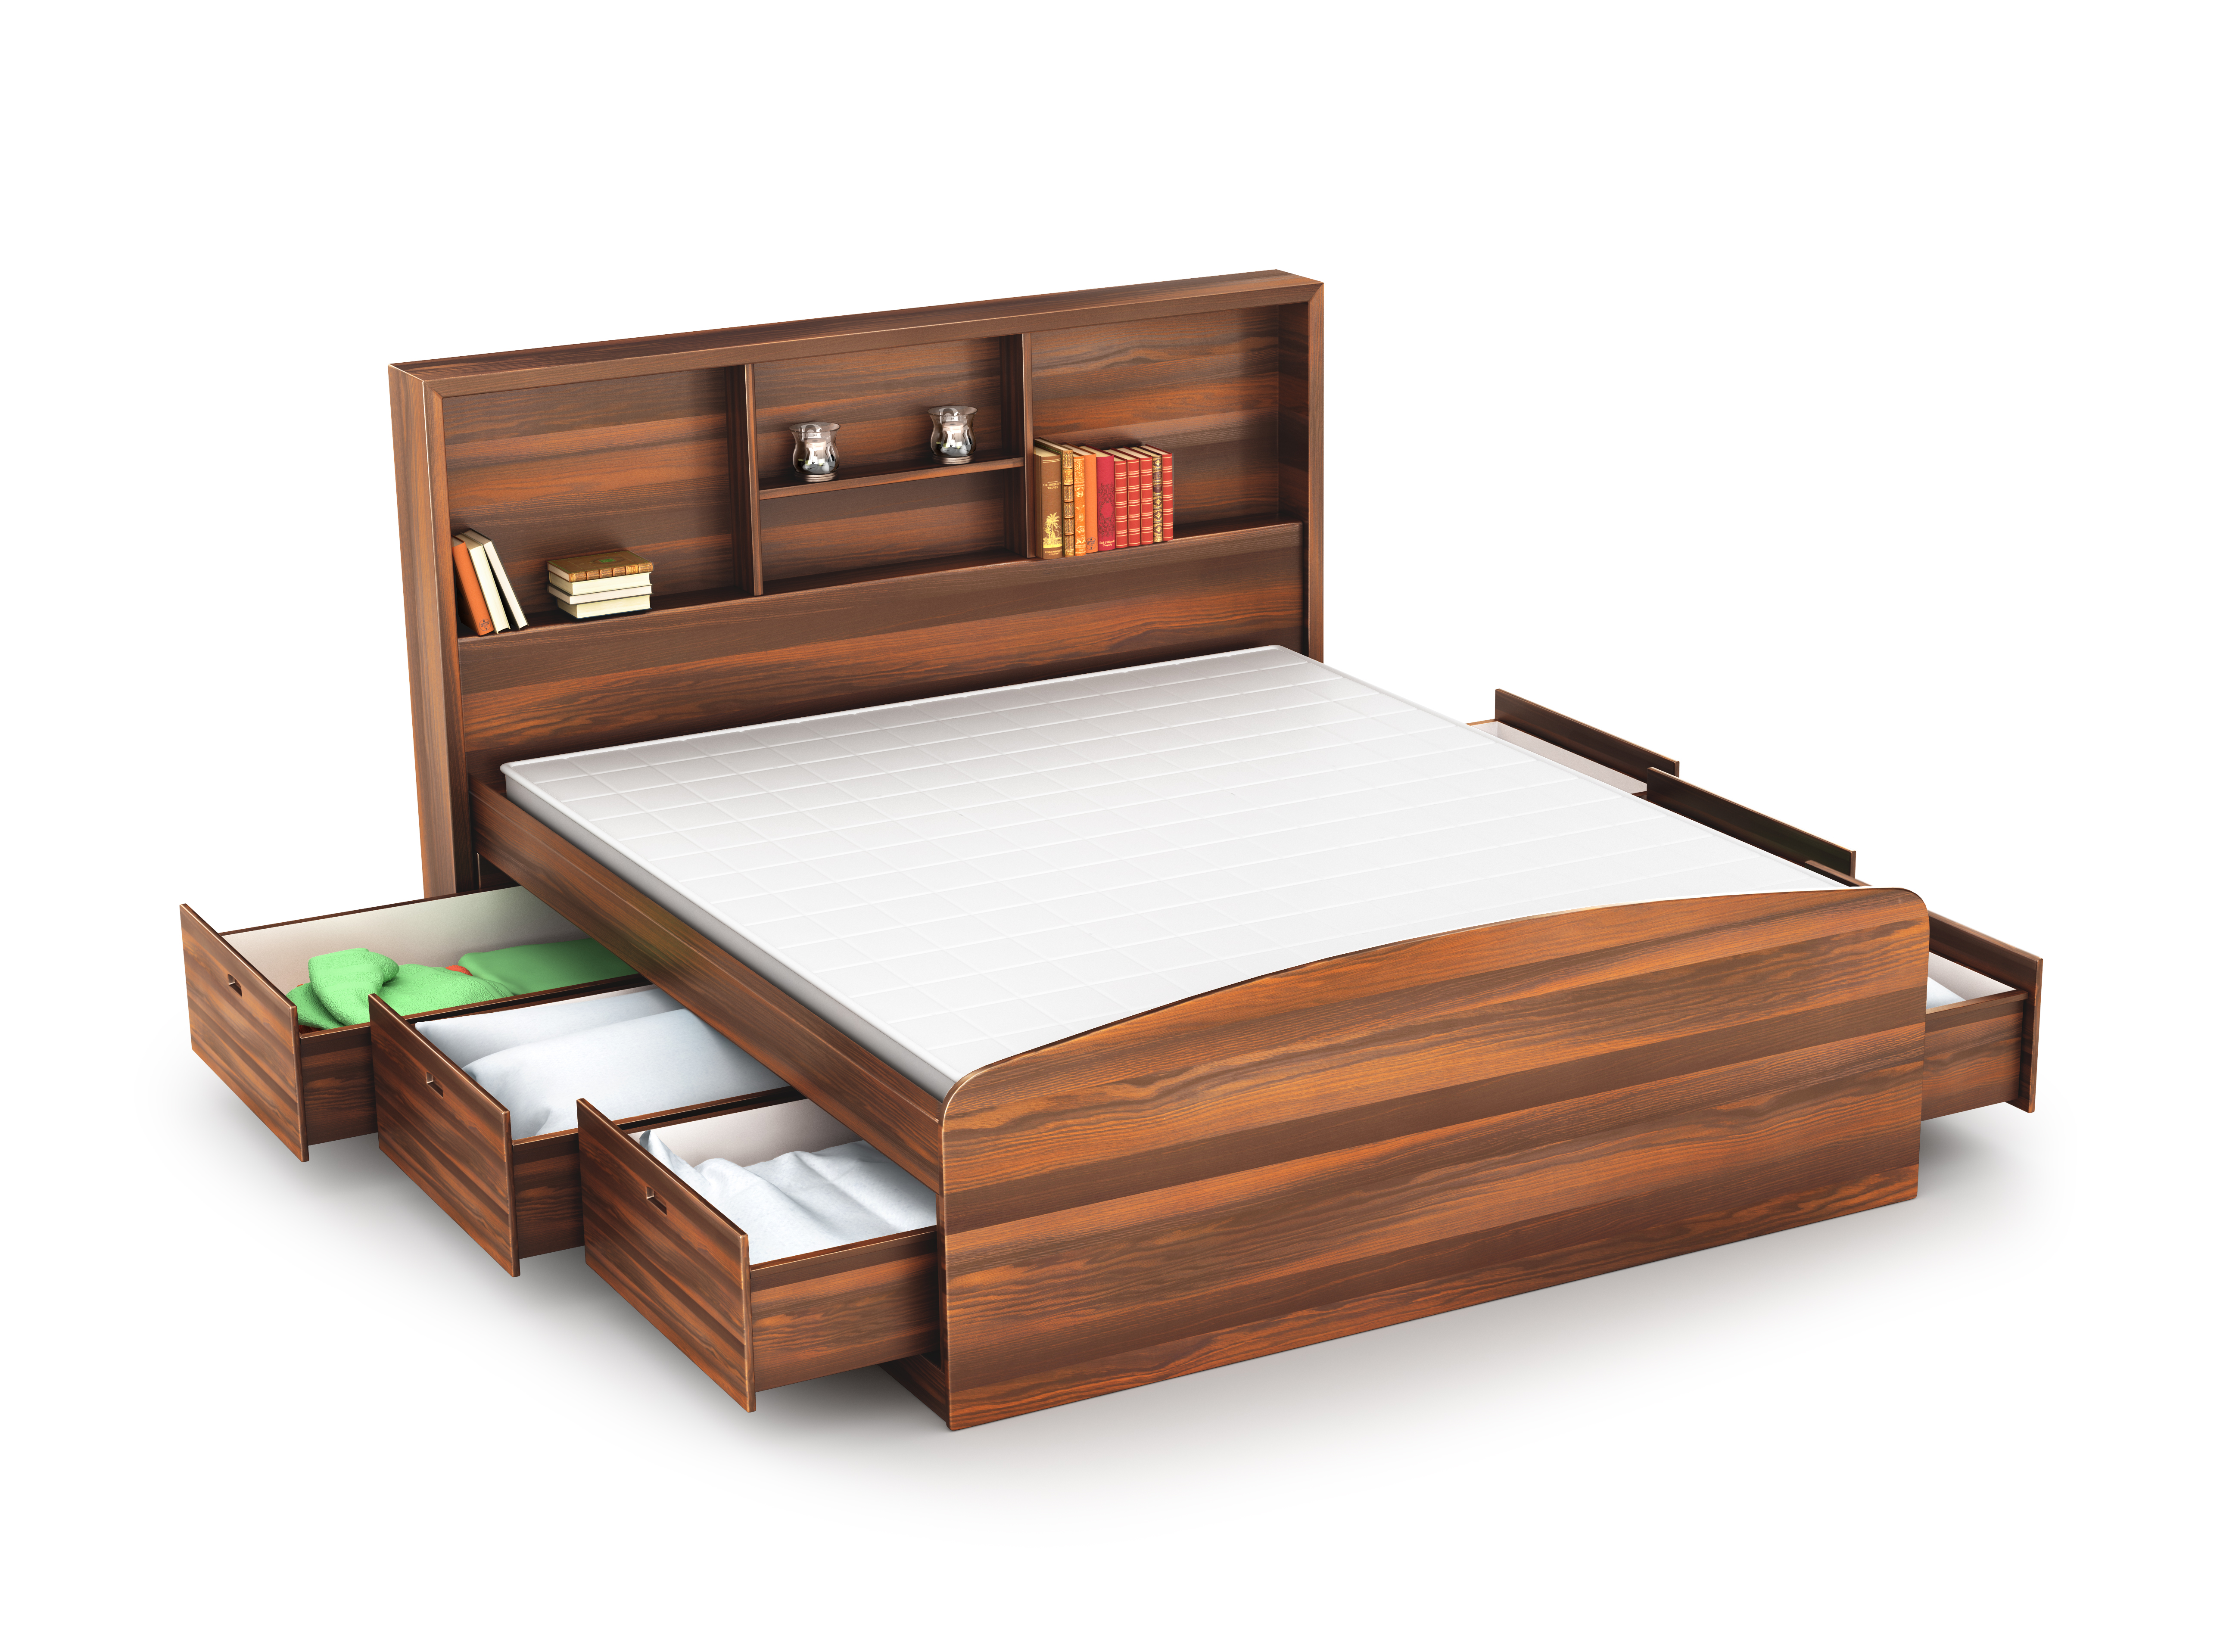 Panel Bed vs. Platform Bed: What's the Difference?